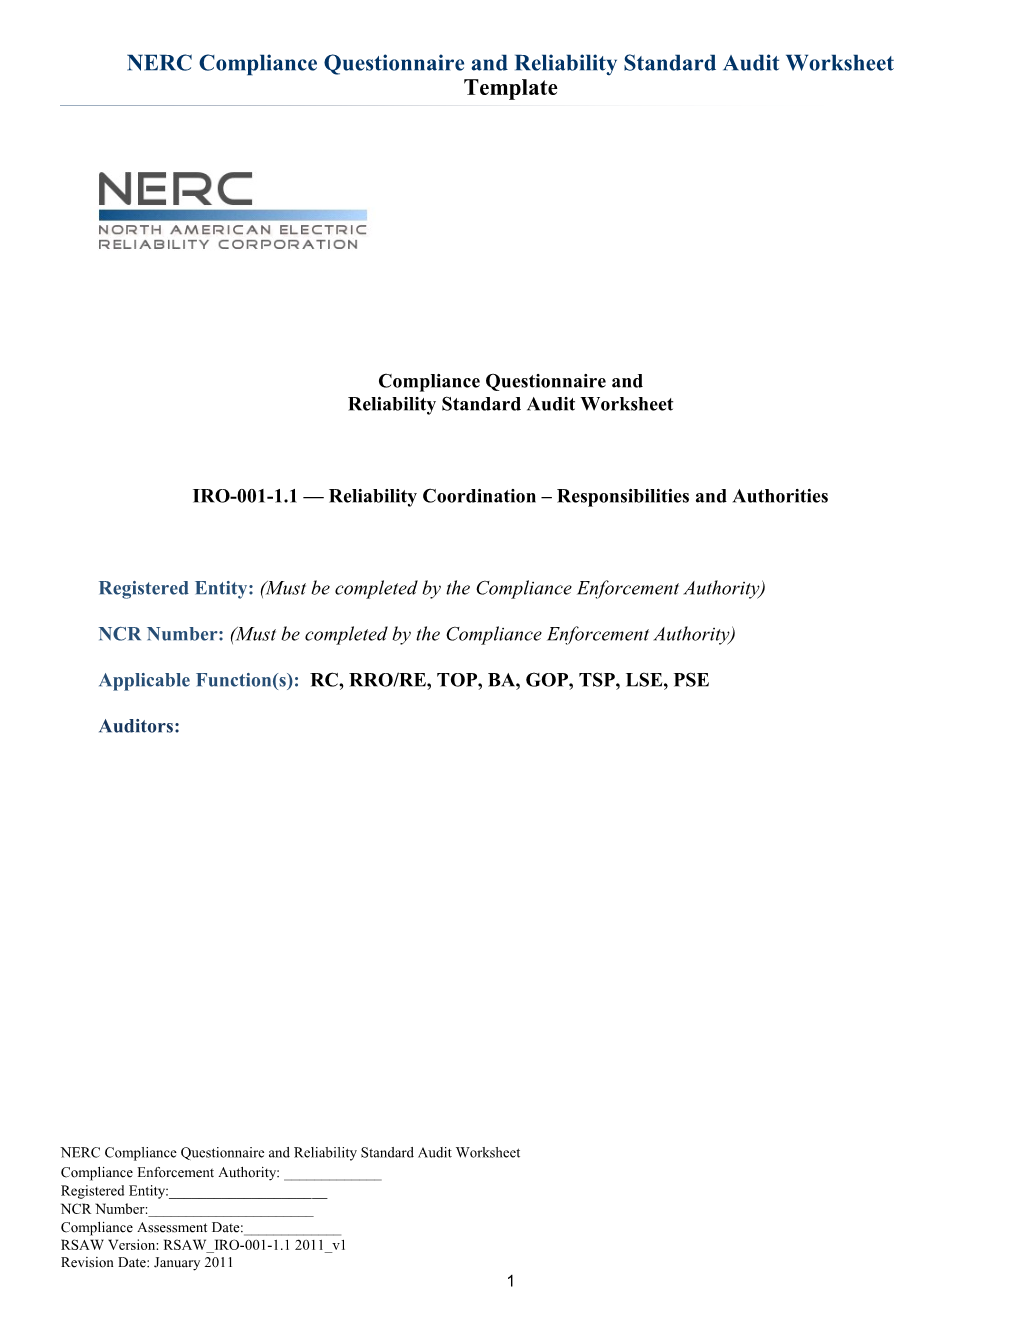 Reliability Coordination - Responsibilities and Authorities